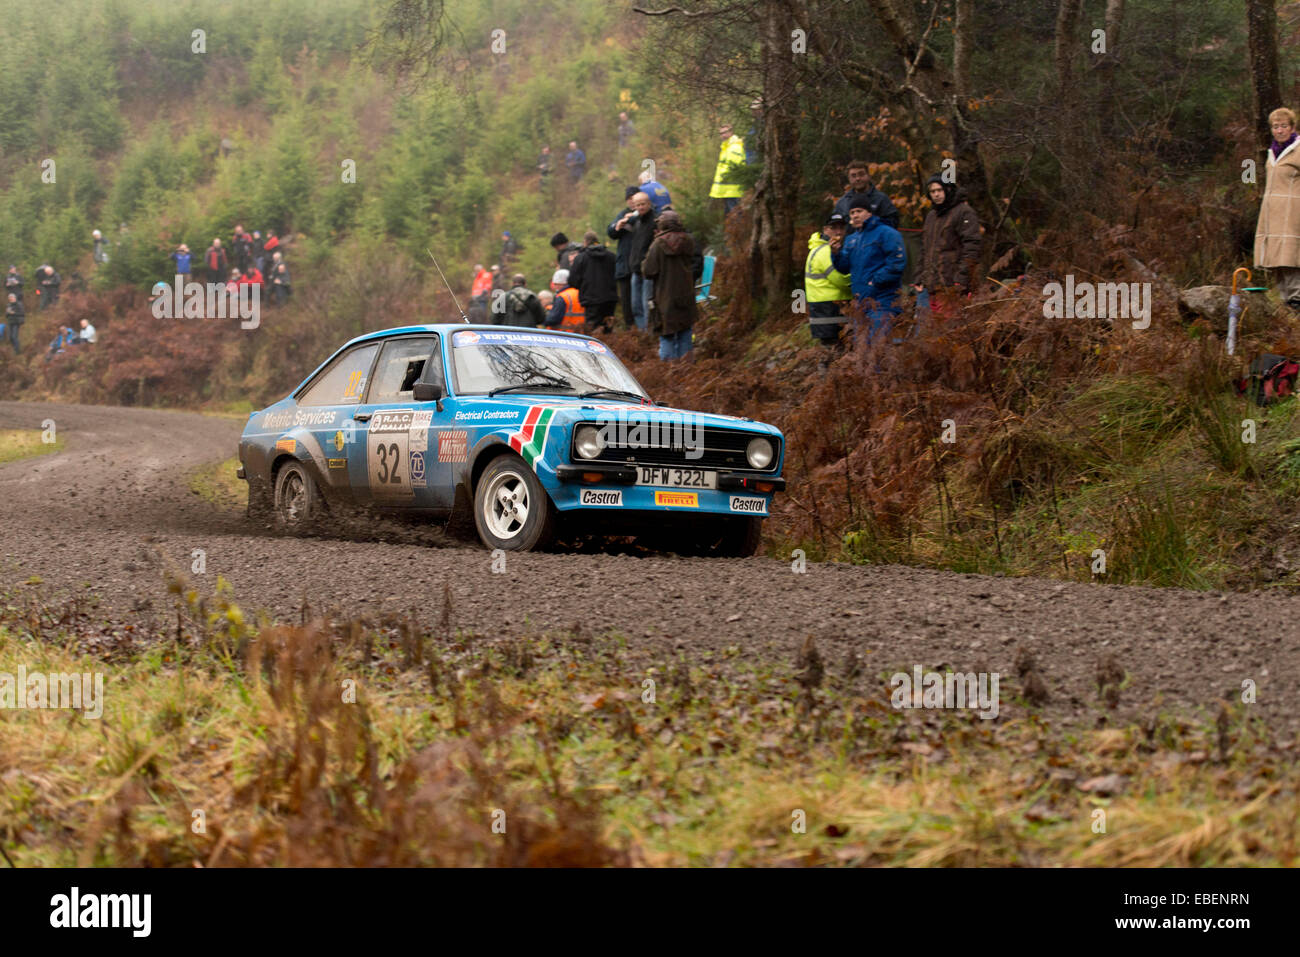 Competitor No  32 Barry Stevenson-Wheeler  on Stage 7 of the RAC Rally in Hamsterley Forest Stock Photo